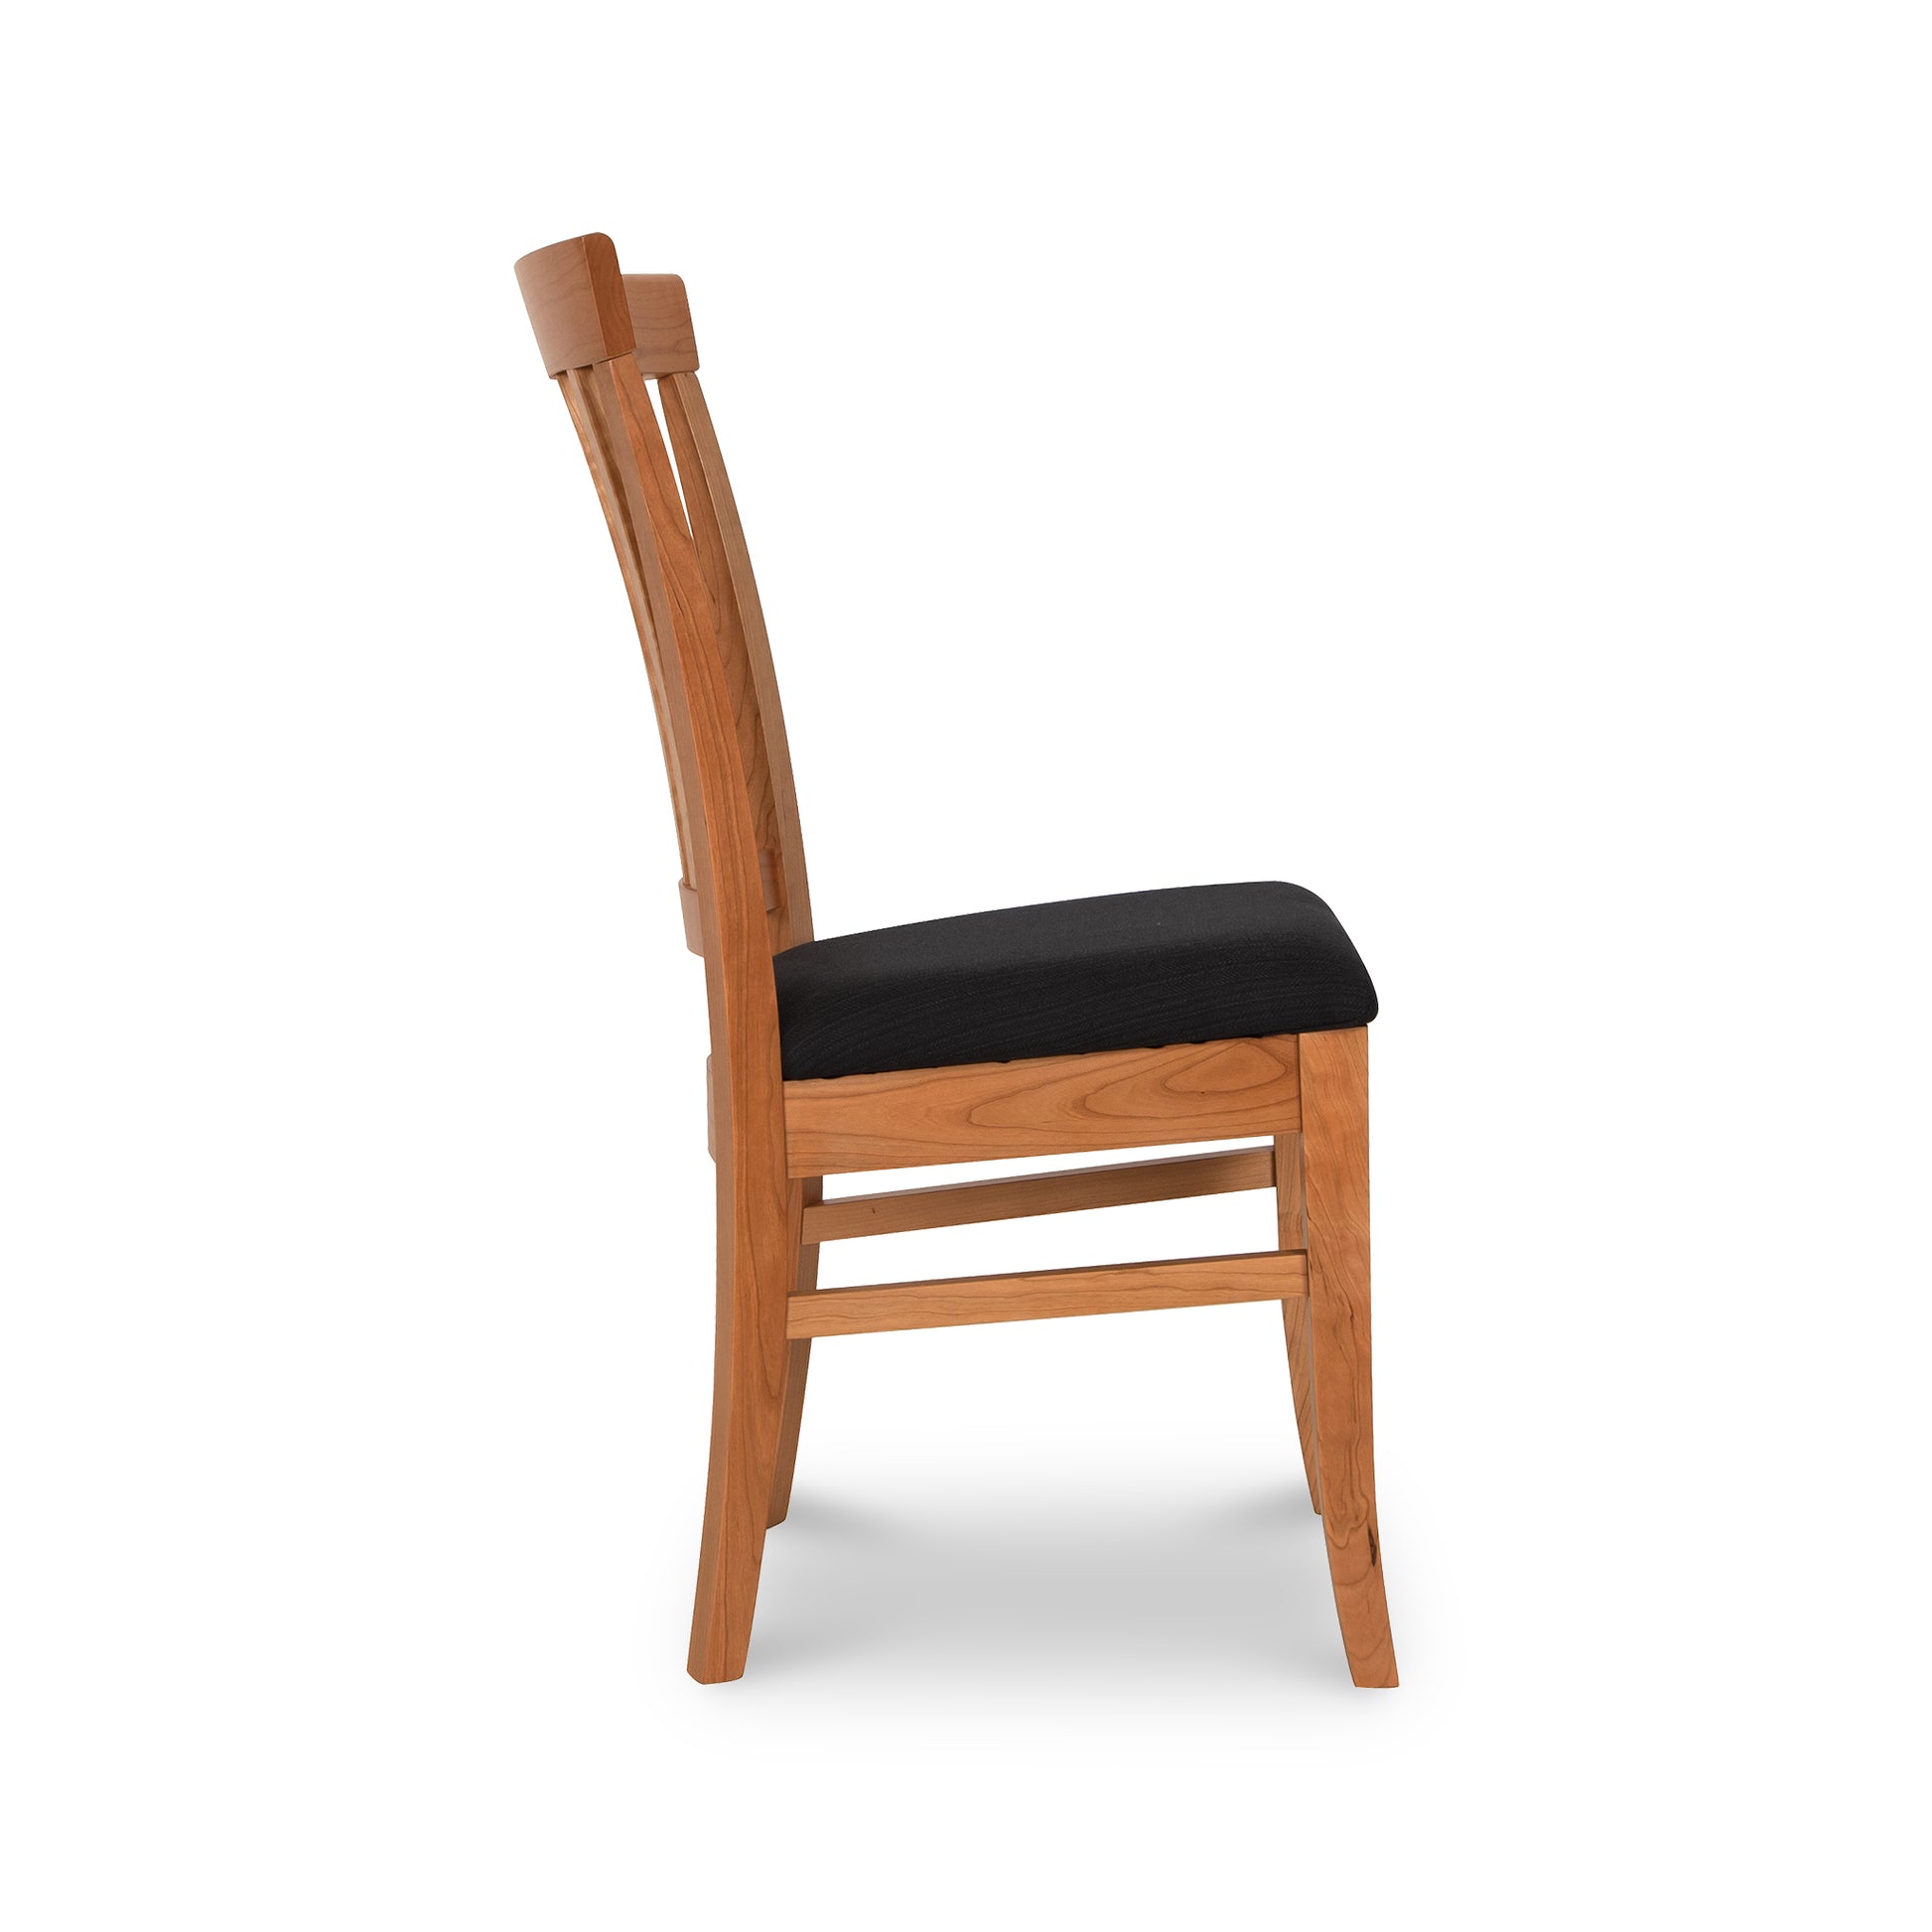 A handmade Lyndon Furniture Bistro Dining Chair with a black upholstered seat.